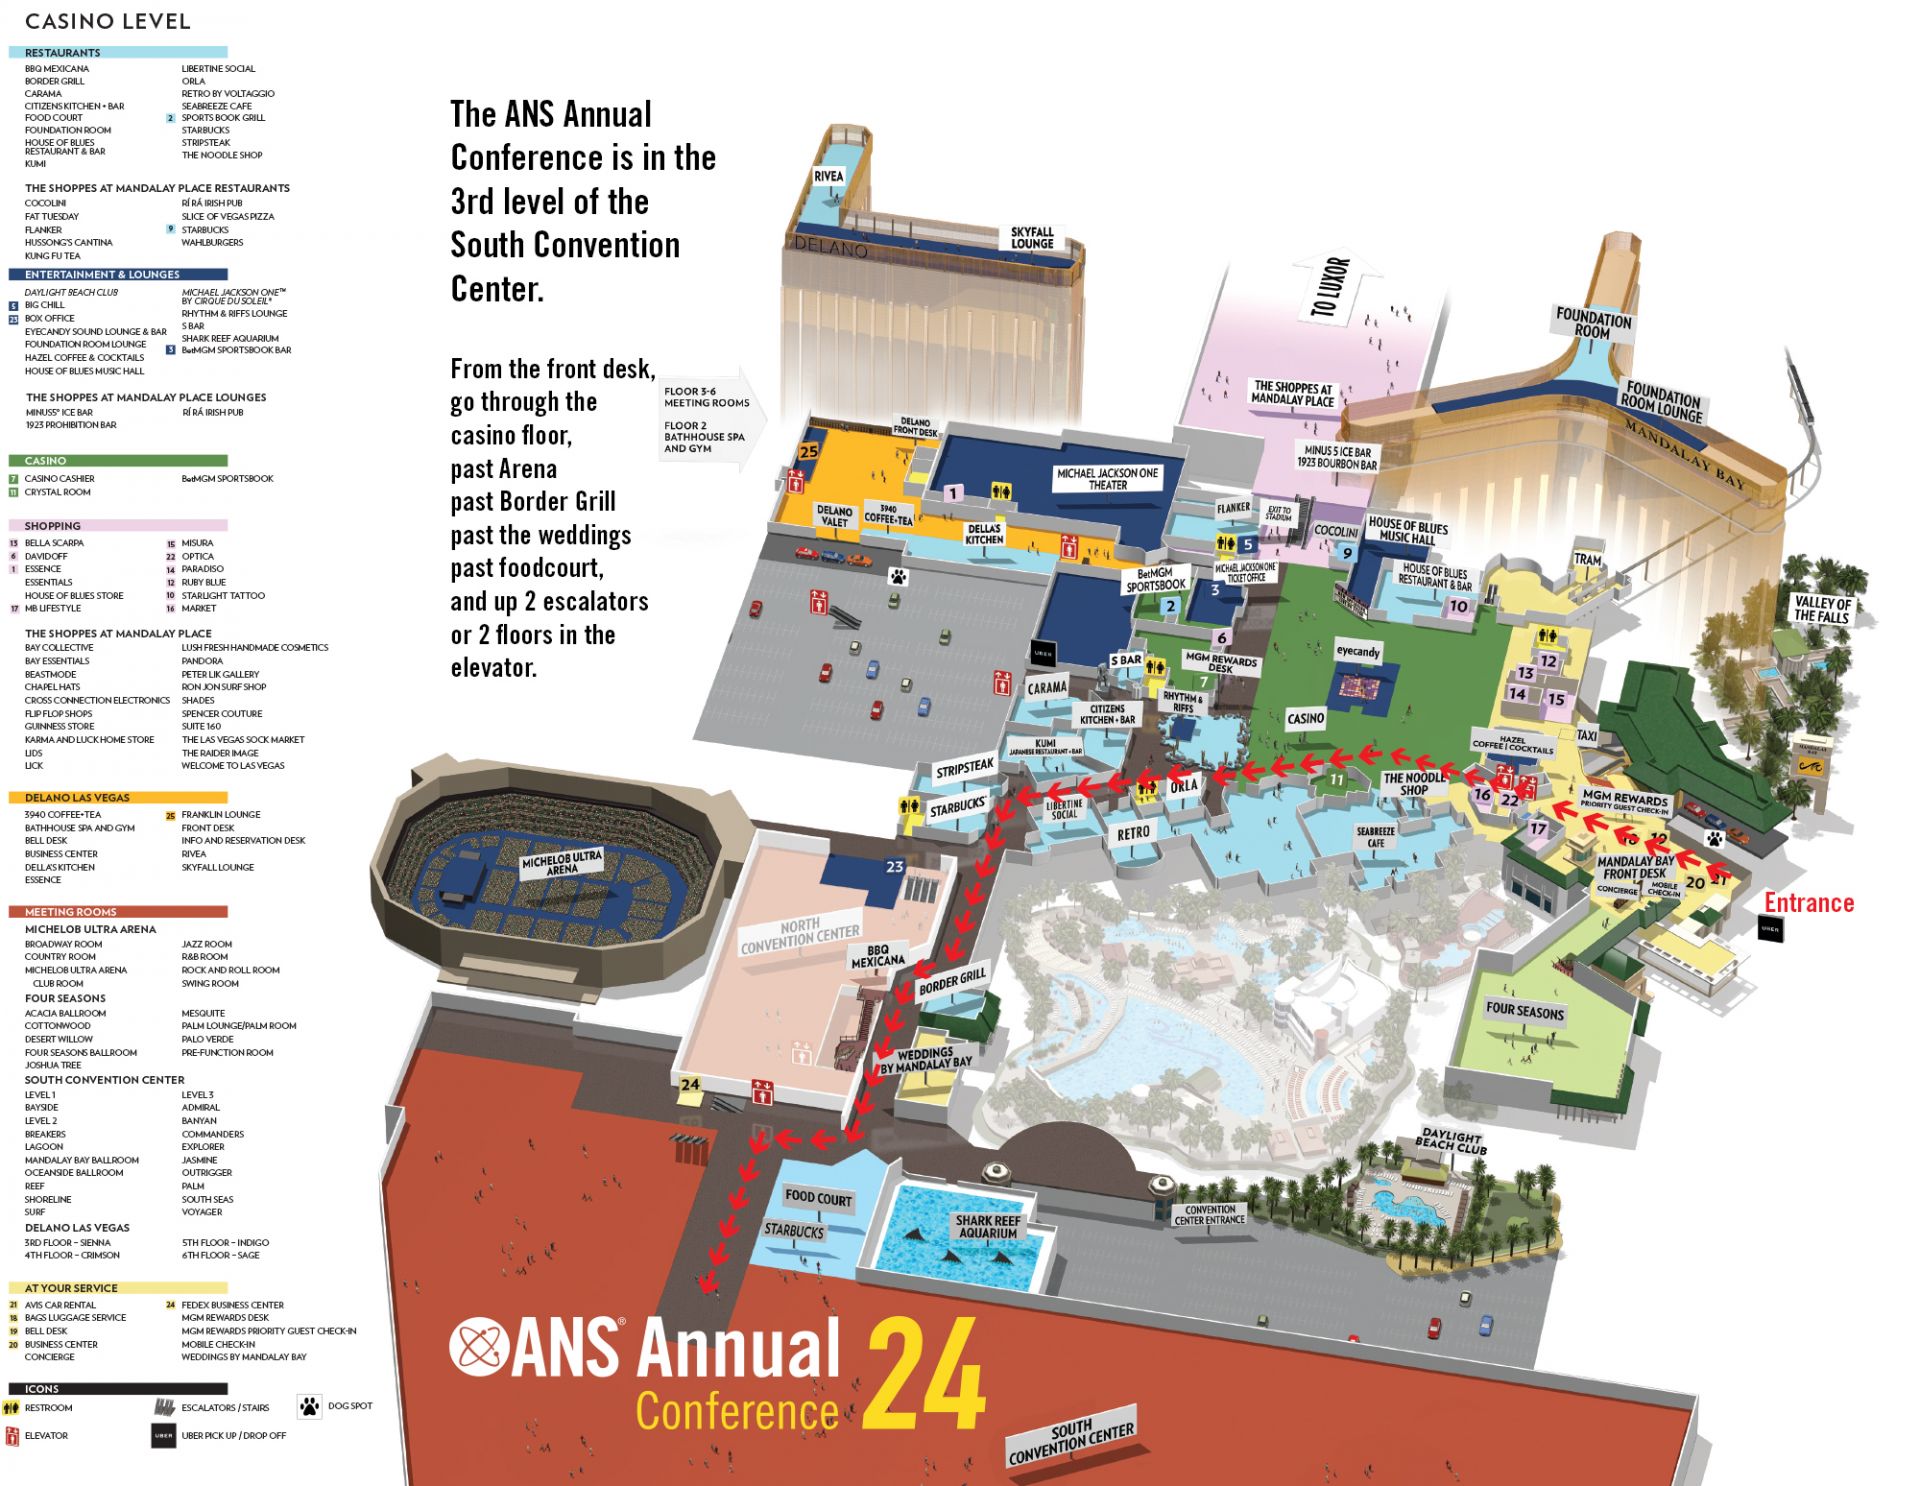 The ANS Annual Conference is in the 3rd level of the South Convention Center at Mandalay Bay.  From the front desk, go through the casino floor, past Arena past Border Grill past Weddings past foodcourt, and up 2 escalators or 2 floors in the elevator. Interactive maps are available in the ANS Meetings App.